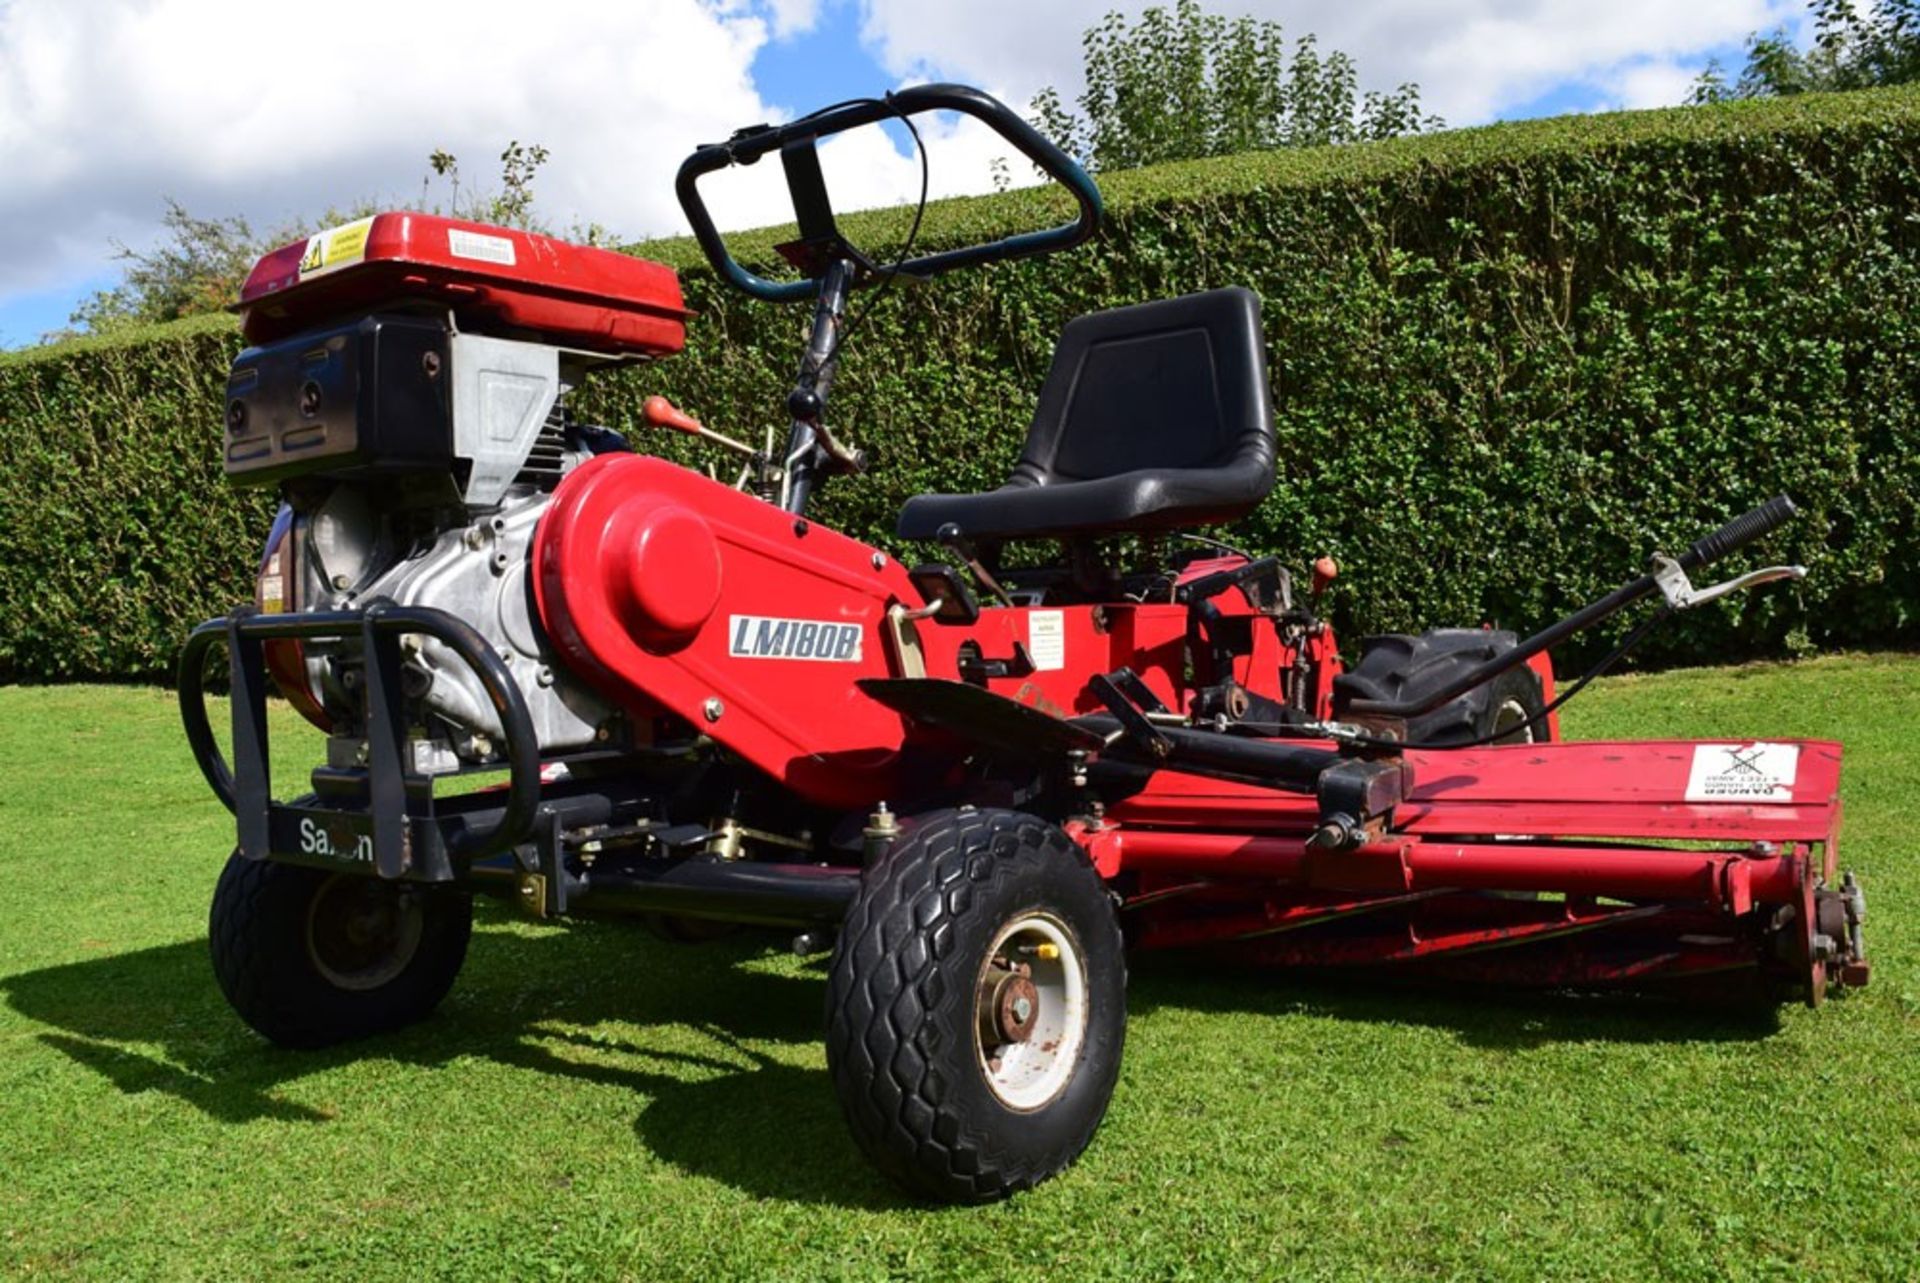 Saxon Triple LM180B Ride On Cylinder Mower - Image 6 of 10